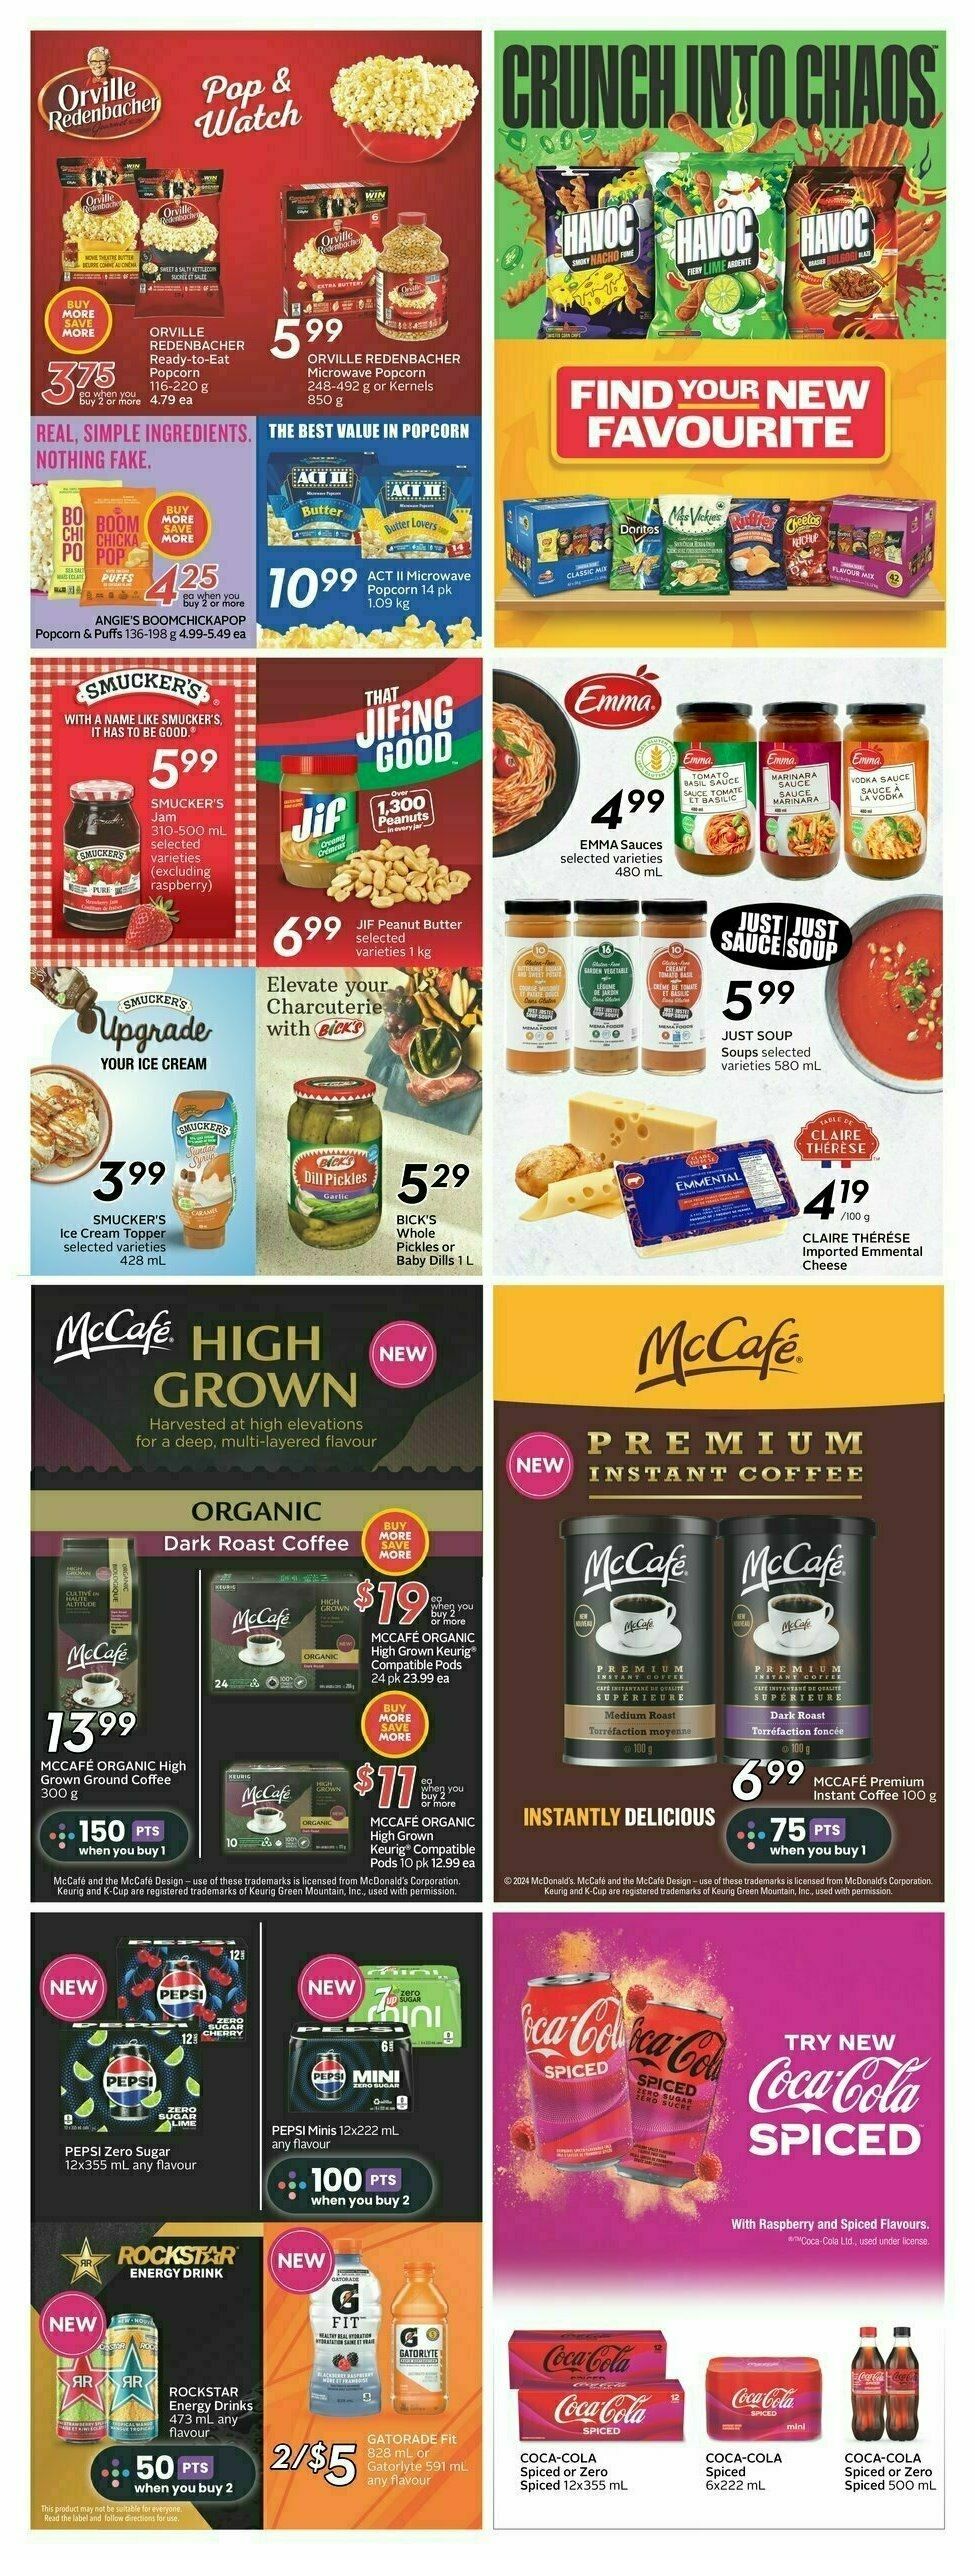 Safeway Flyer from February 29